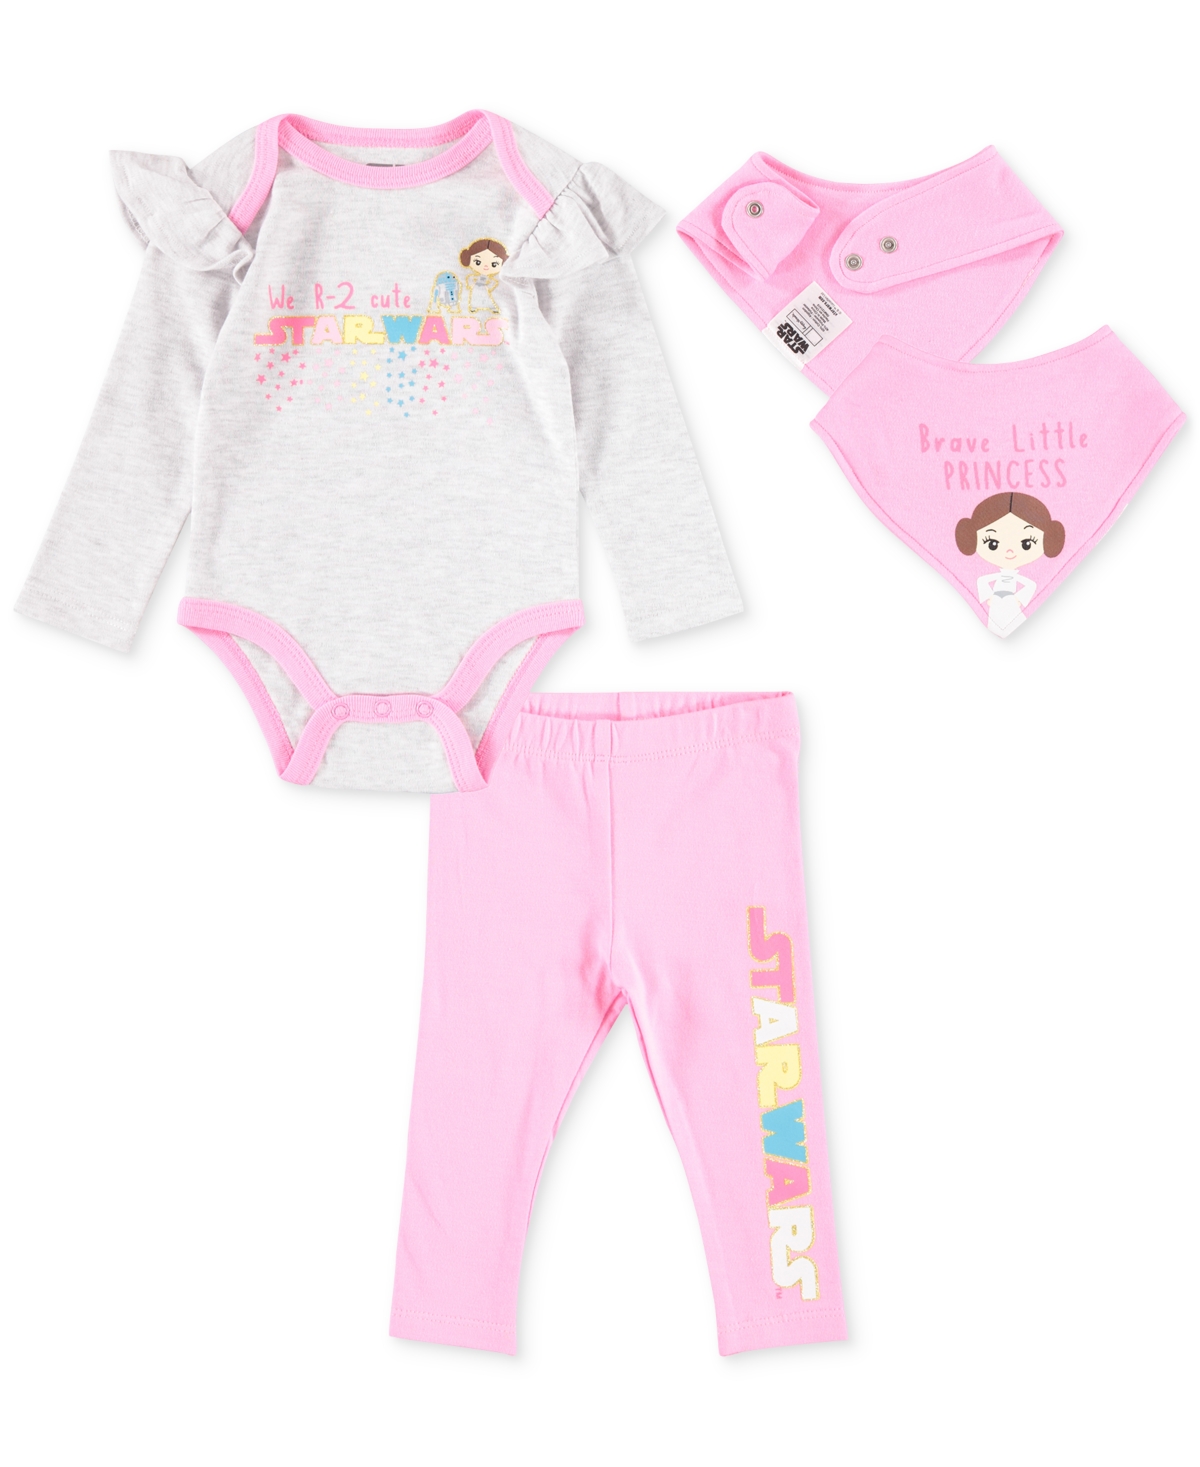 Happy Threads Baby Girls Star Wars Bodysuit, Pant And Bib, 3 Piece Set In Pink/white Combo